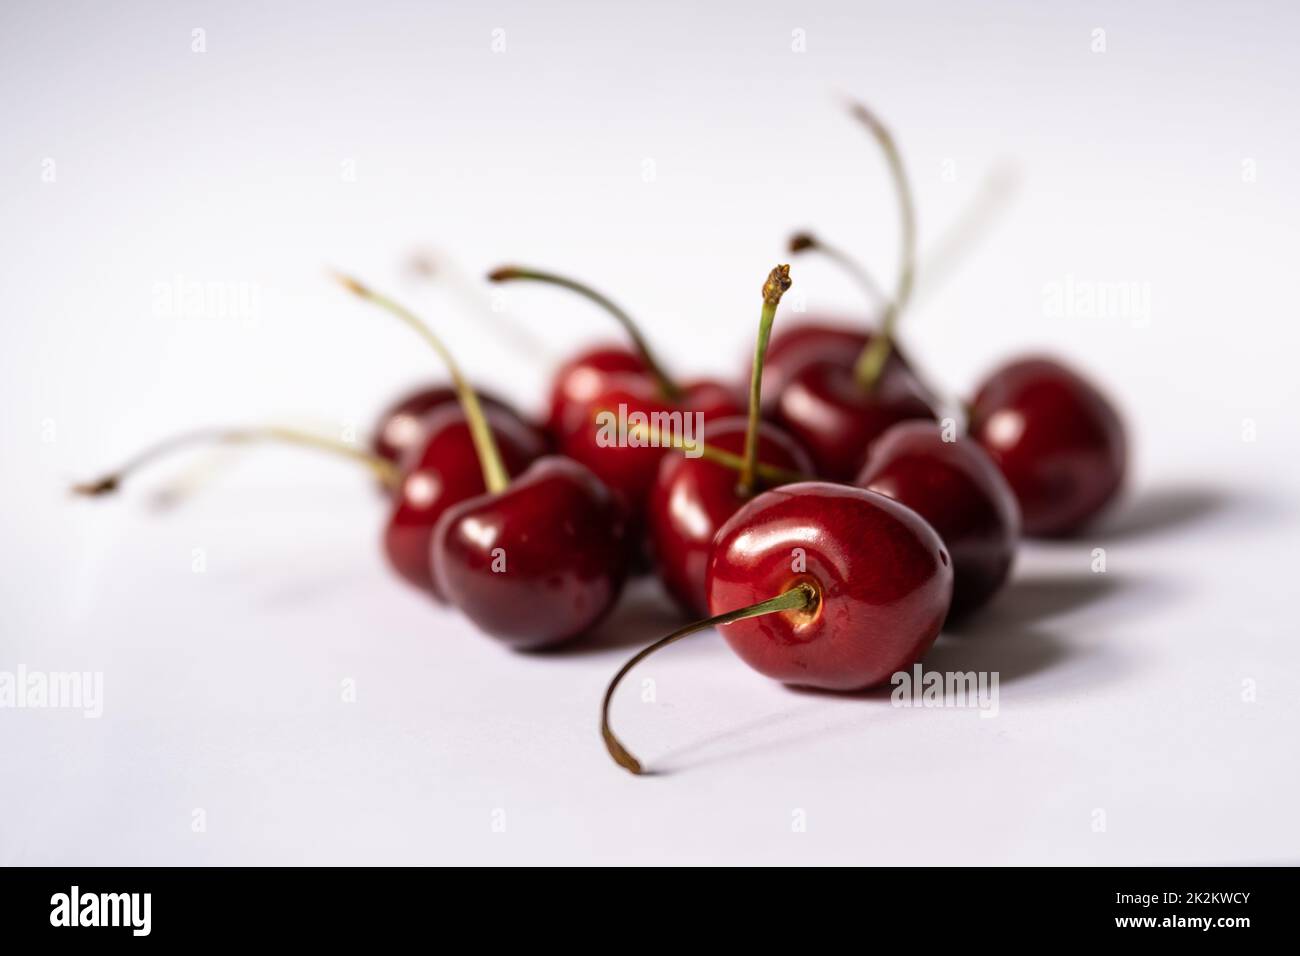 Close-up sweet cherries with stems Stock Photo